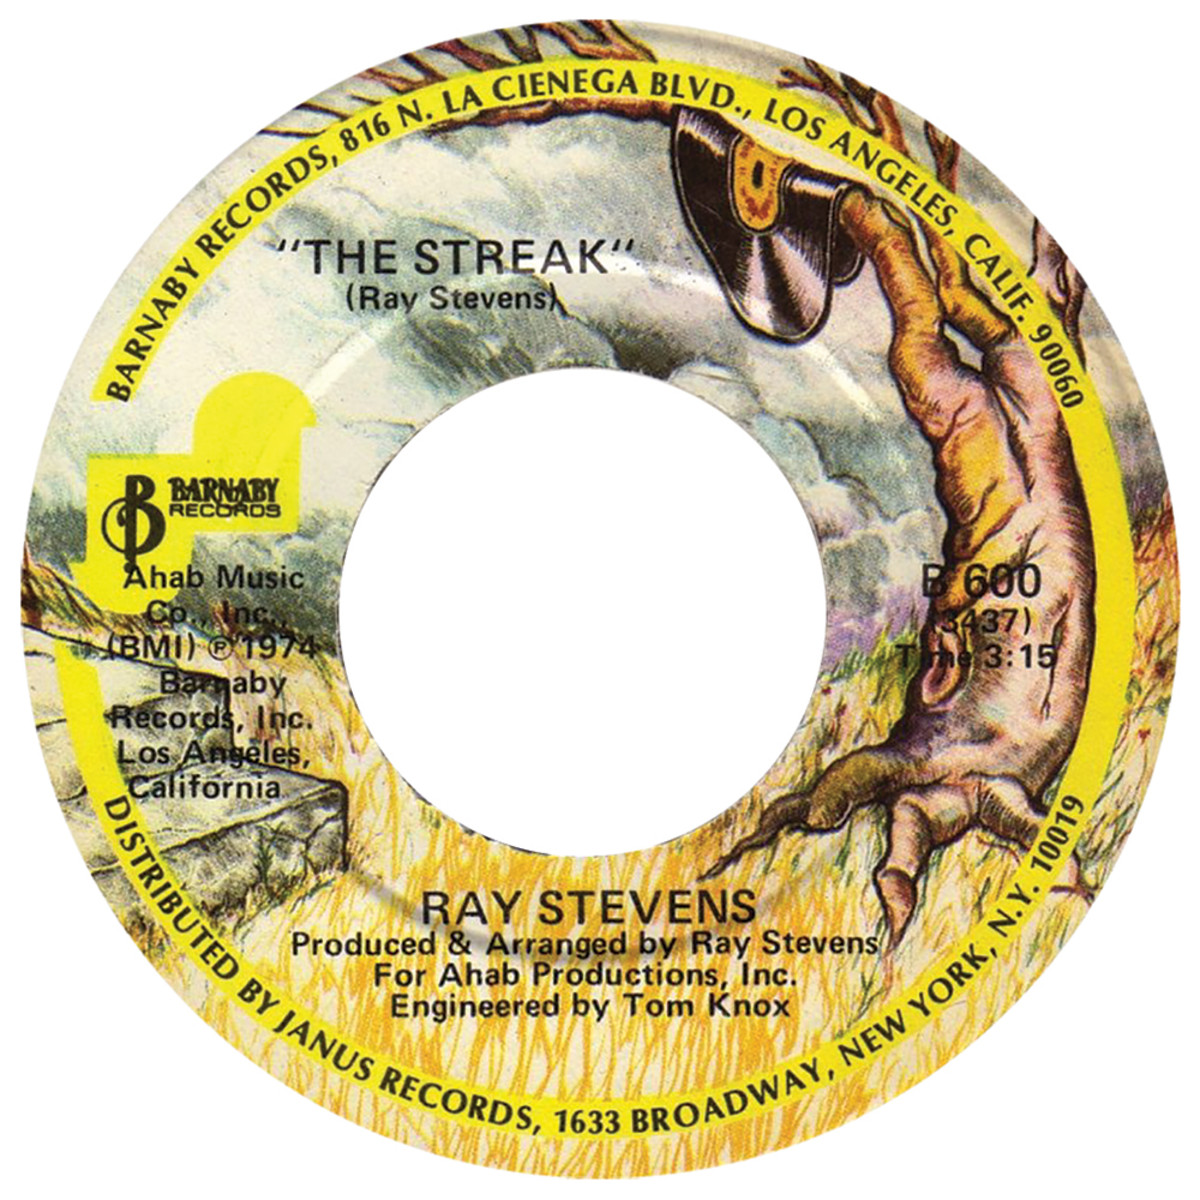 Ray Stevens’ comedic hit “The Streak” goofed on the cultural fad of running around naked in public, (aka “streaking”). It hit No. 1 in the U.S. in 1974. 